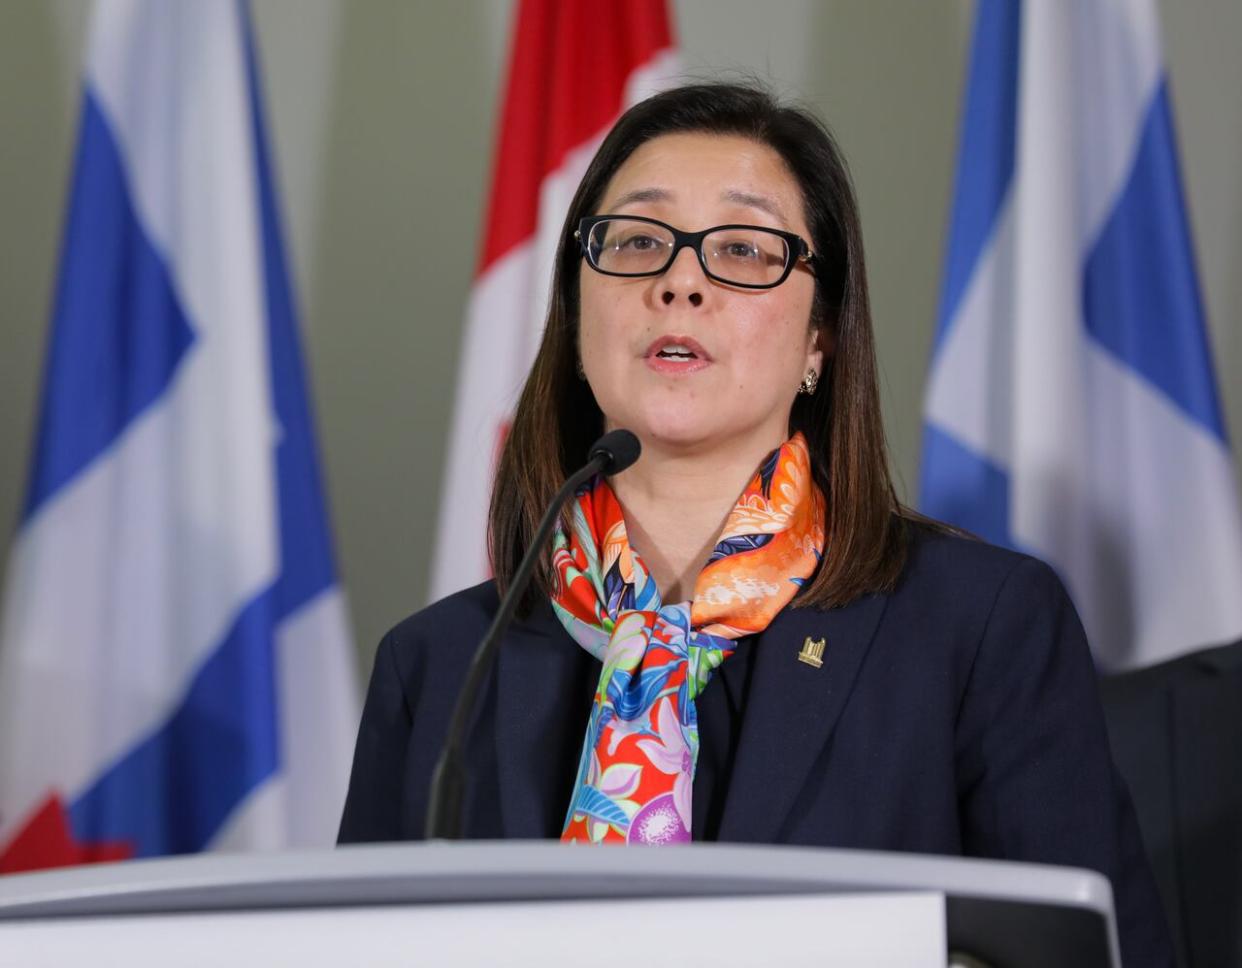 Dr. Eileen de Villa, Toronto's medical officer of health, announced in a YouTube video on Tuesday that she will resign from her position effective Dec. 31, 2024. (Michael Wilson/CBC - image credit)